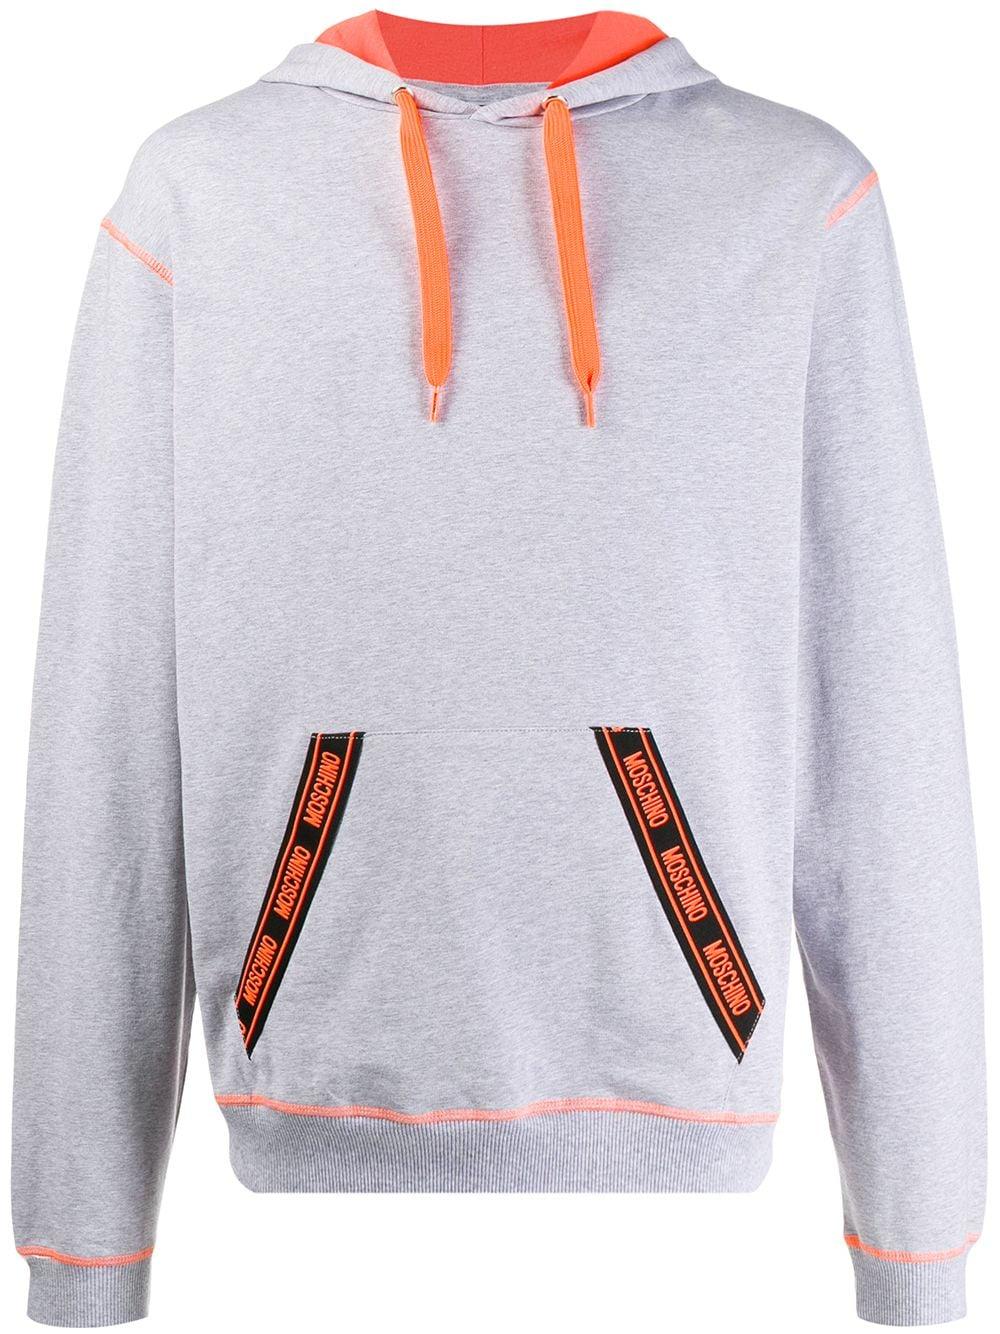 Moschino Cotton Neon Taped Hoodie in Grey (Gray) for Men - Lyst